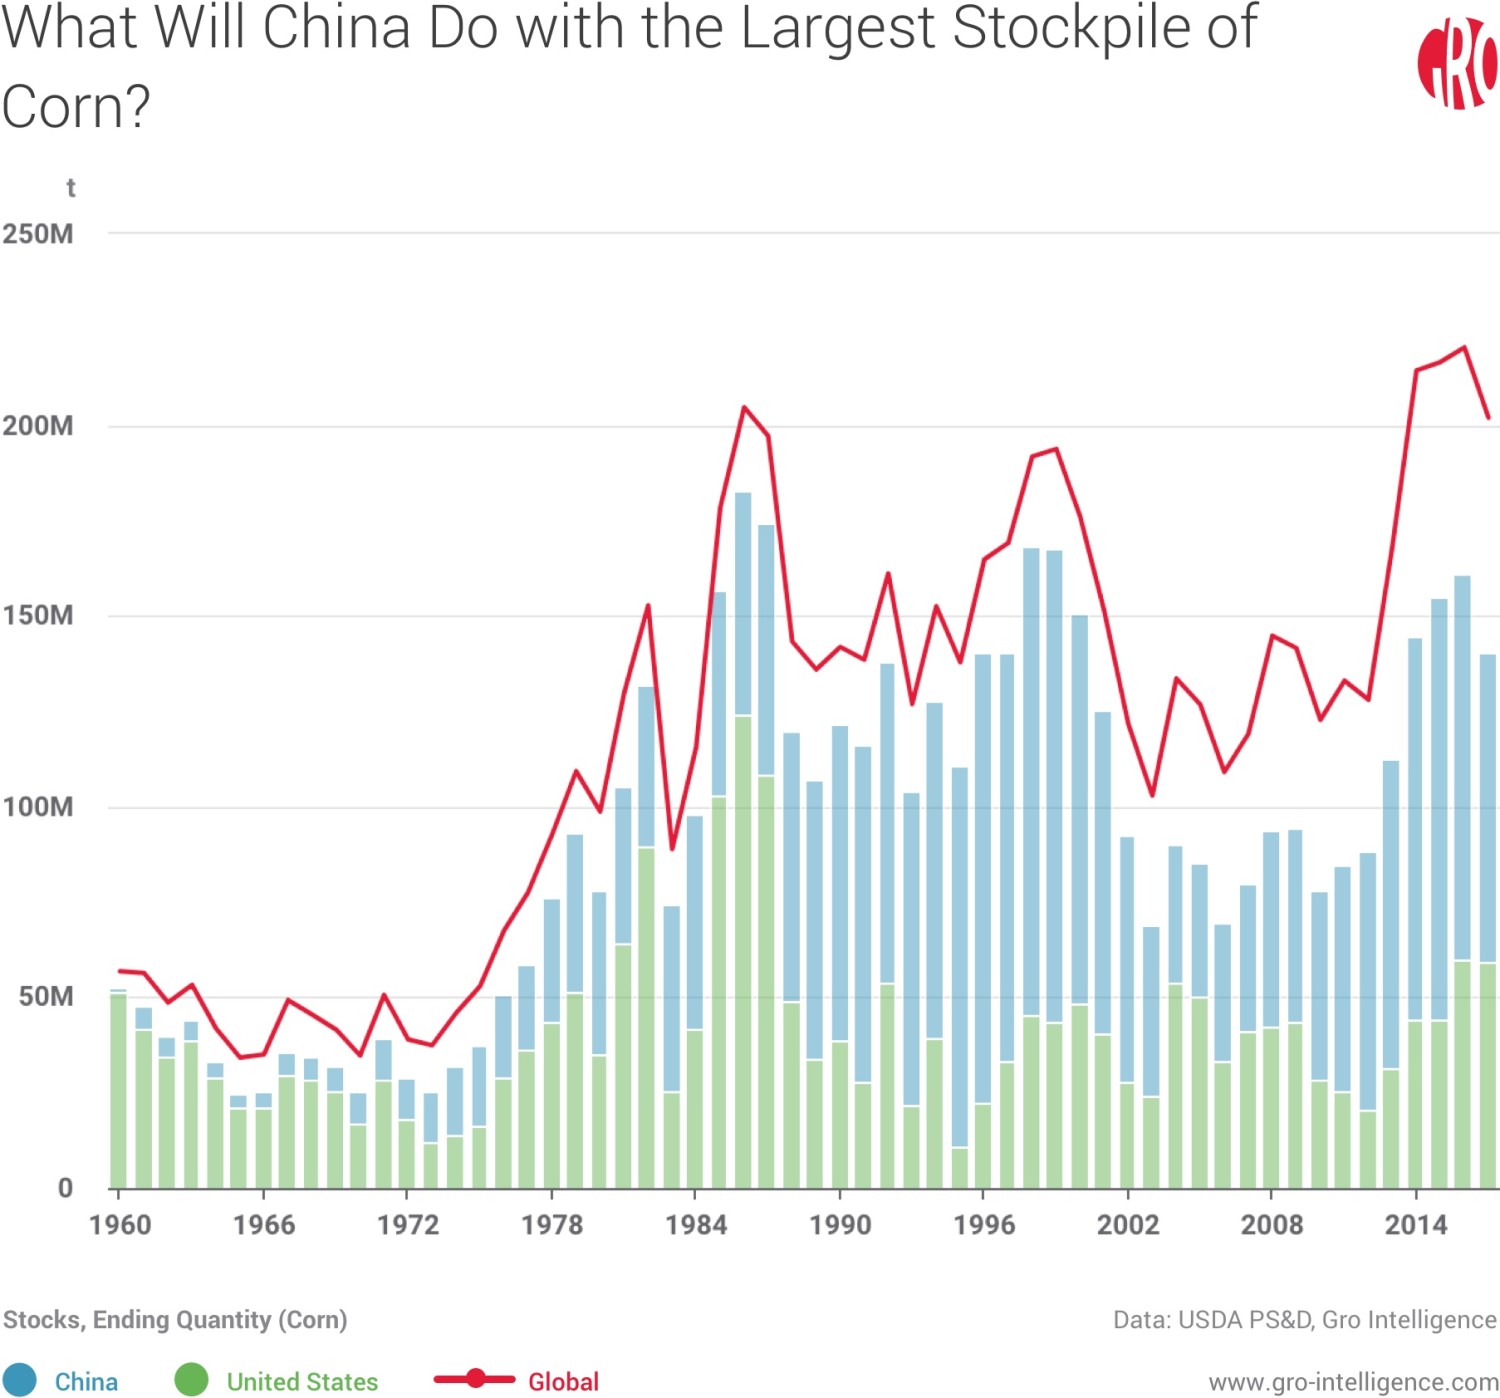 What will China do with the largest stockpile of corn?